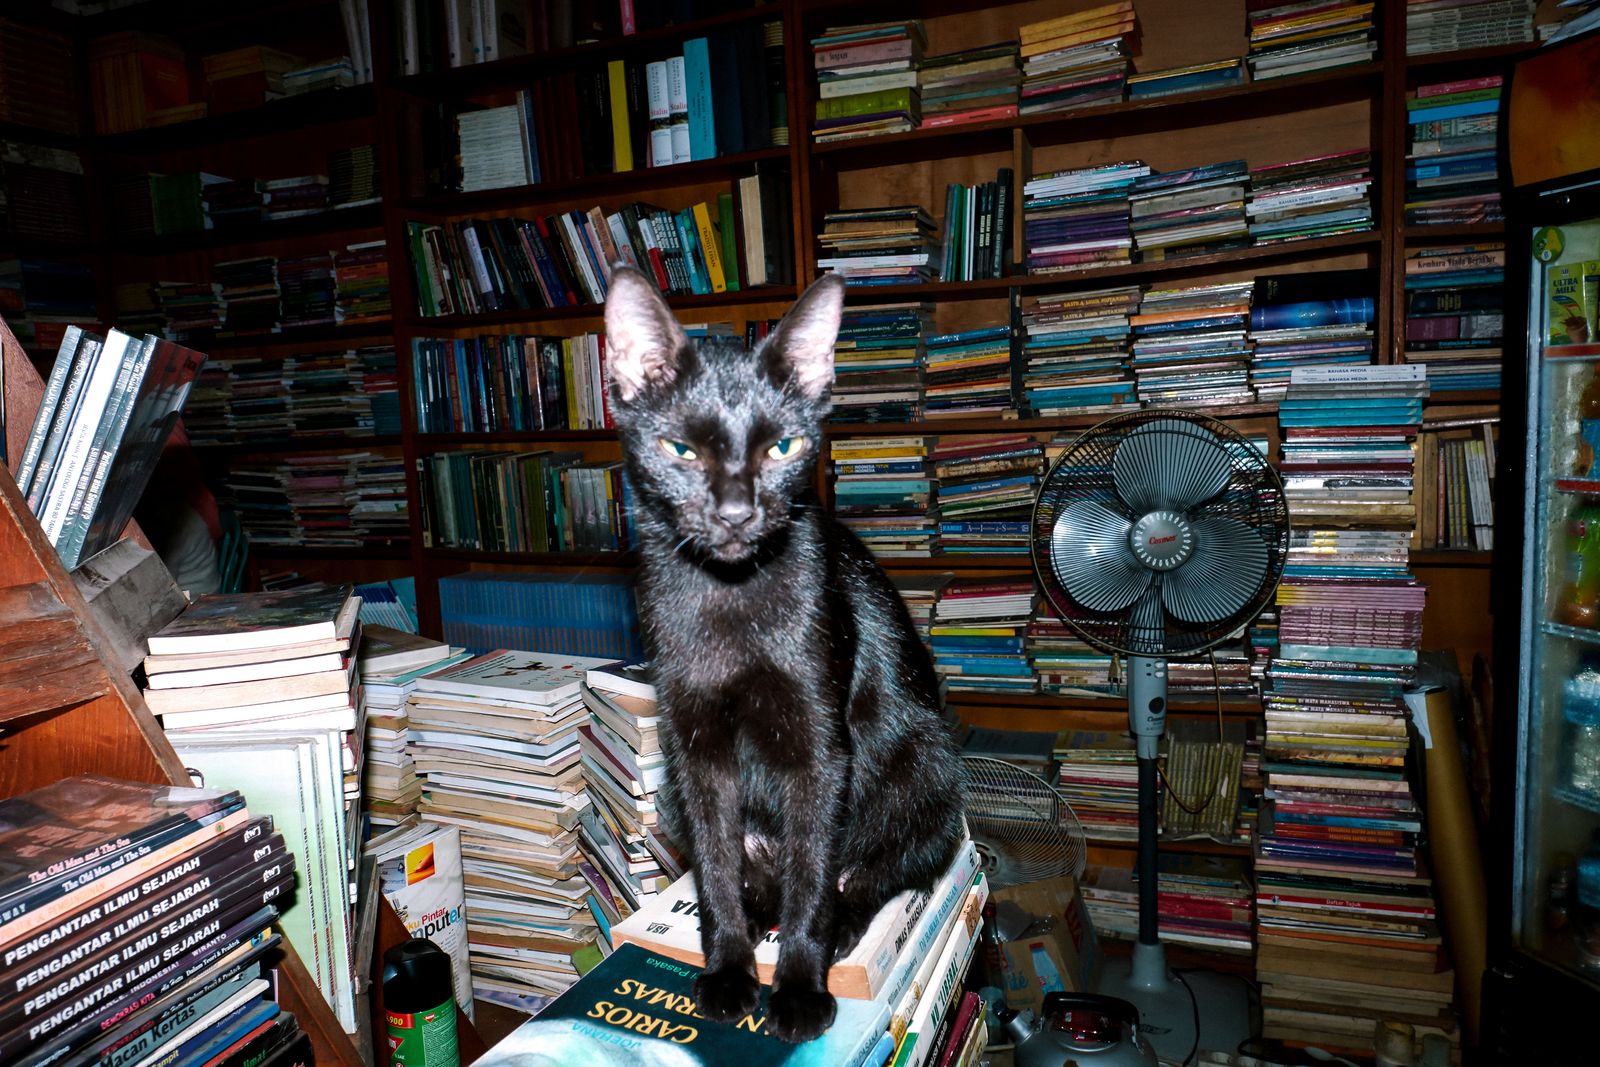 © Mochammad Yusni Aziz - 2. A black cat in a second-hand book store that we visited.